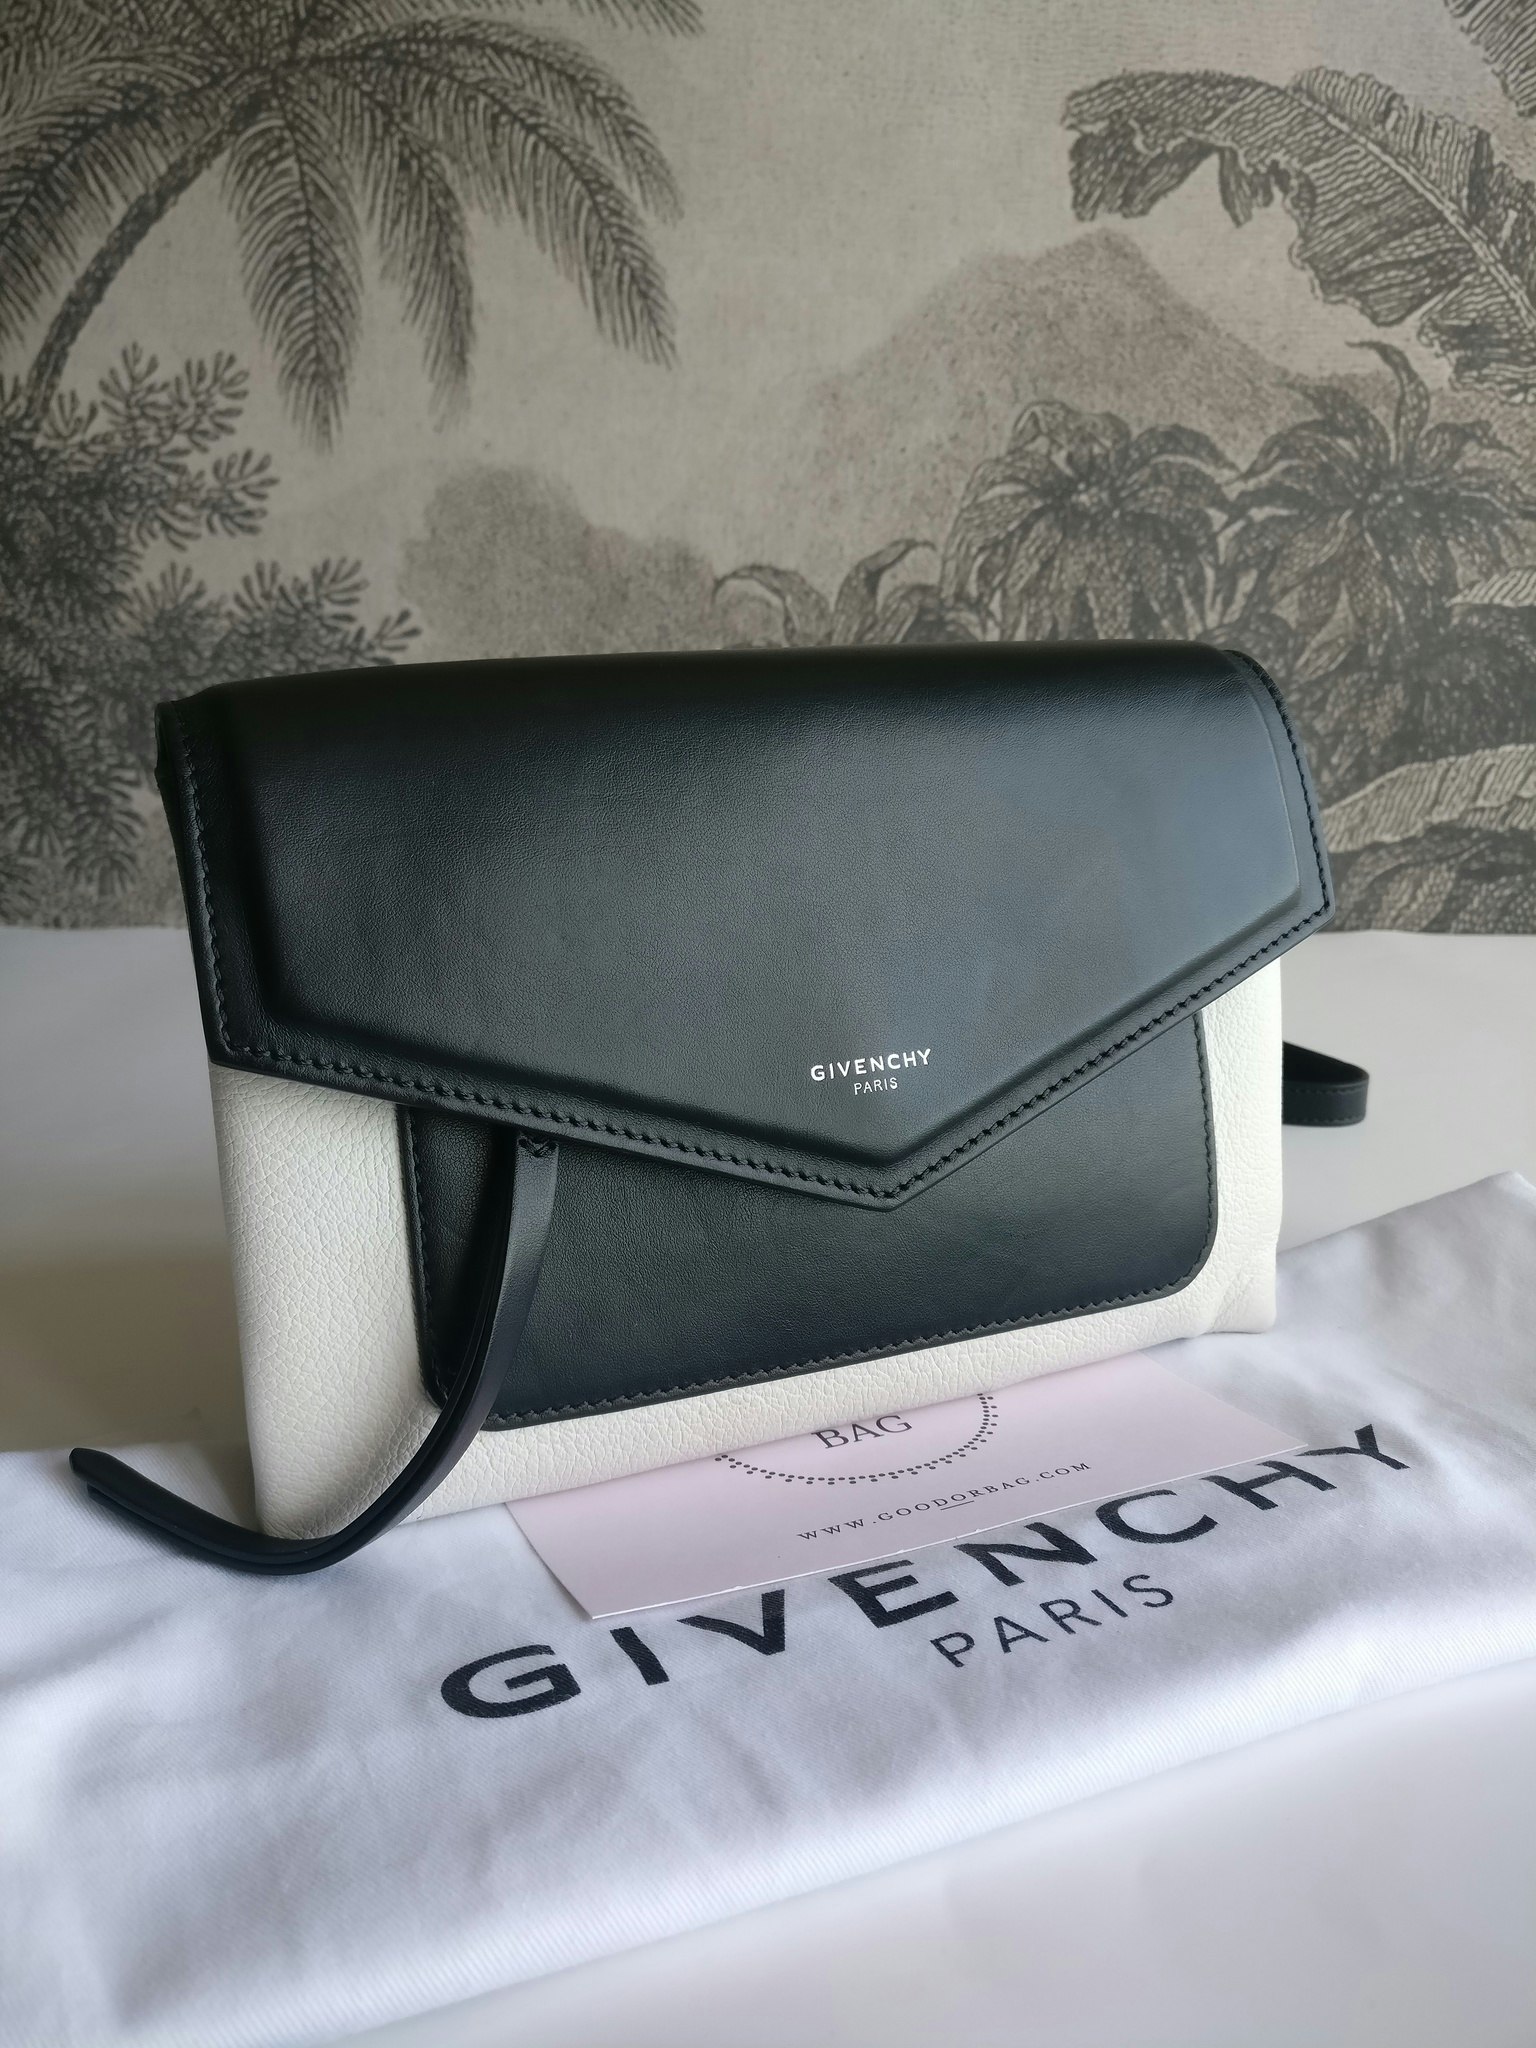 Givenchy Duetto crossbody bag